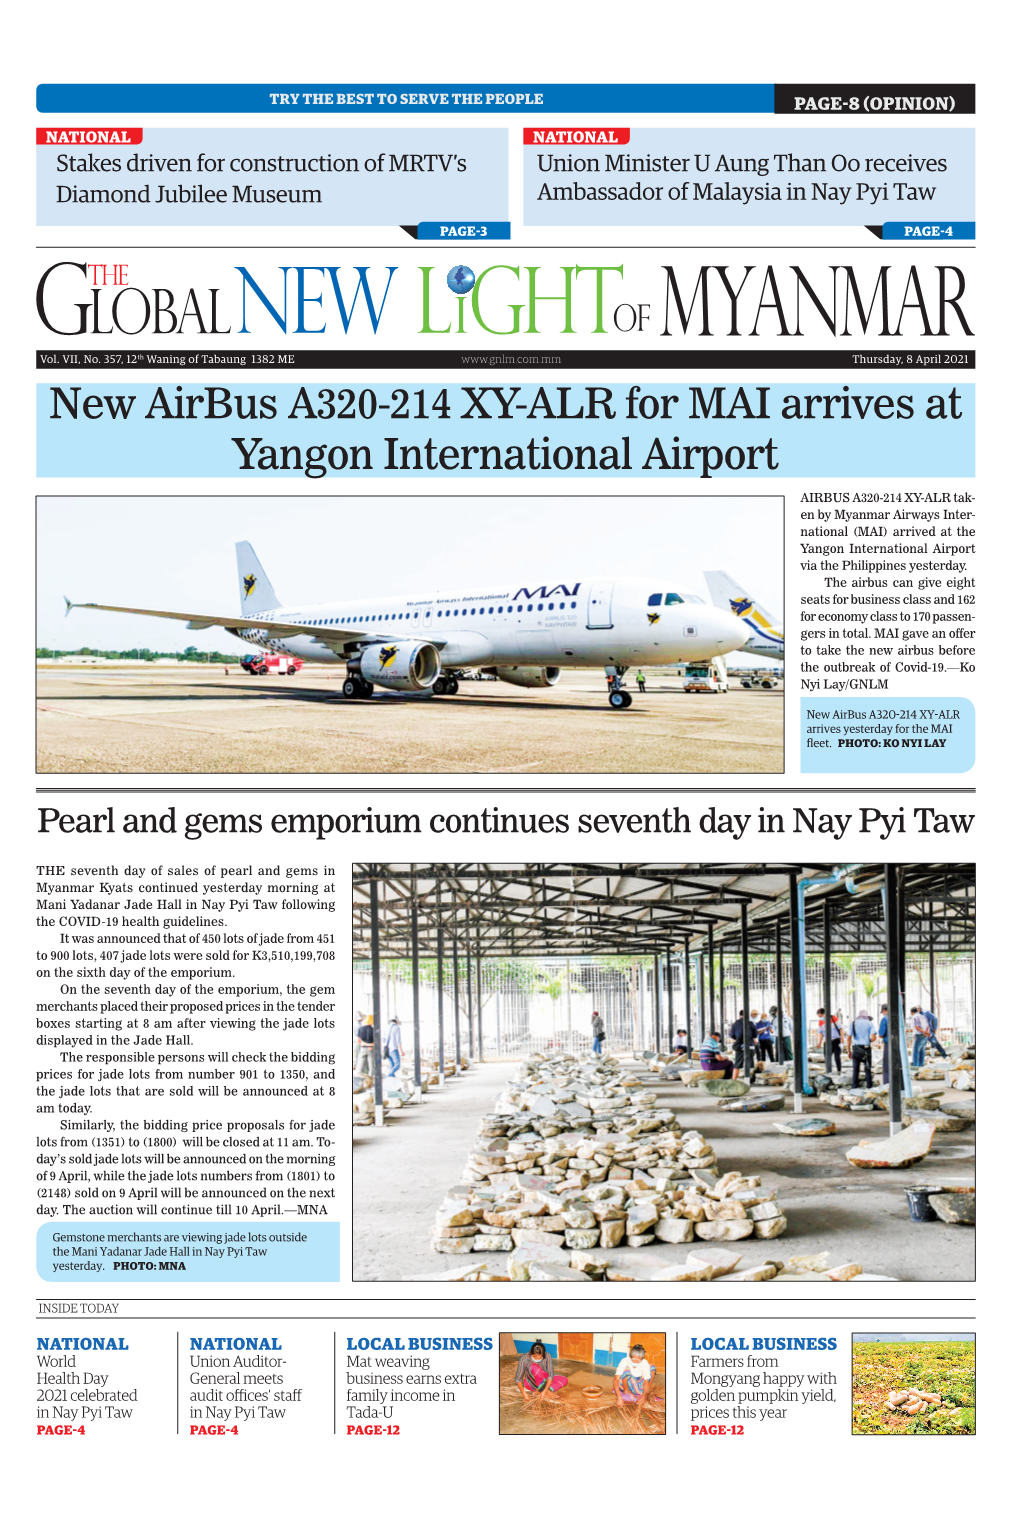 New Airbus A320-214 XY-ALR for MAI Arrives at Yangon International Airport